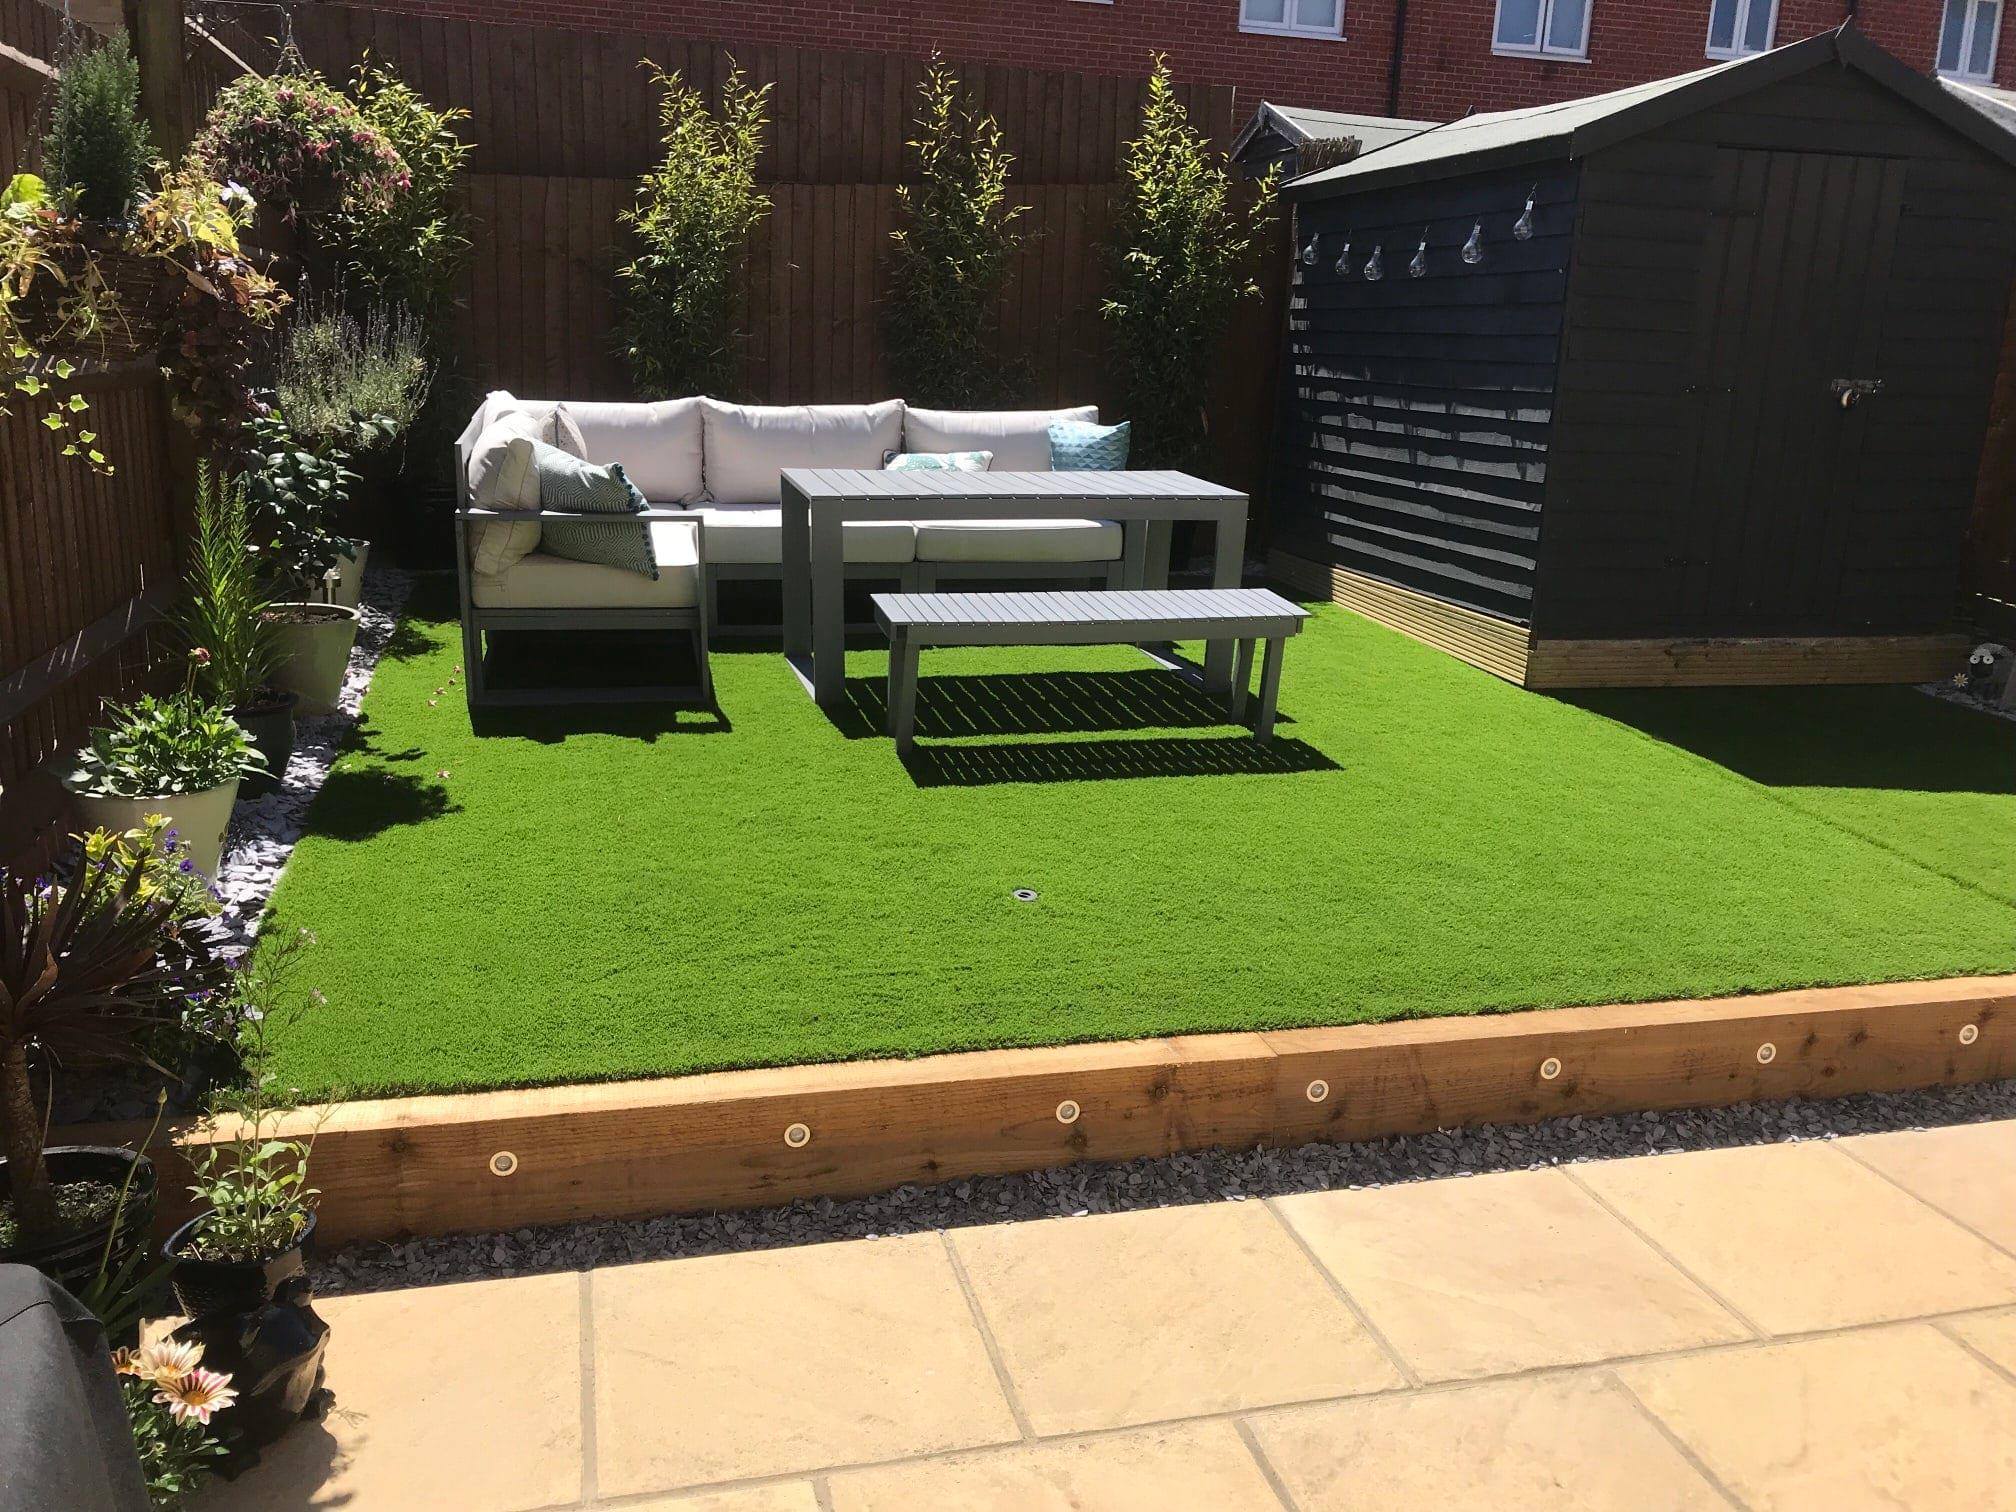 Completed Landscaping Project in East London with an outdoor corner sofa on a raised artificial grass area with LED underlighting